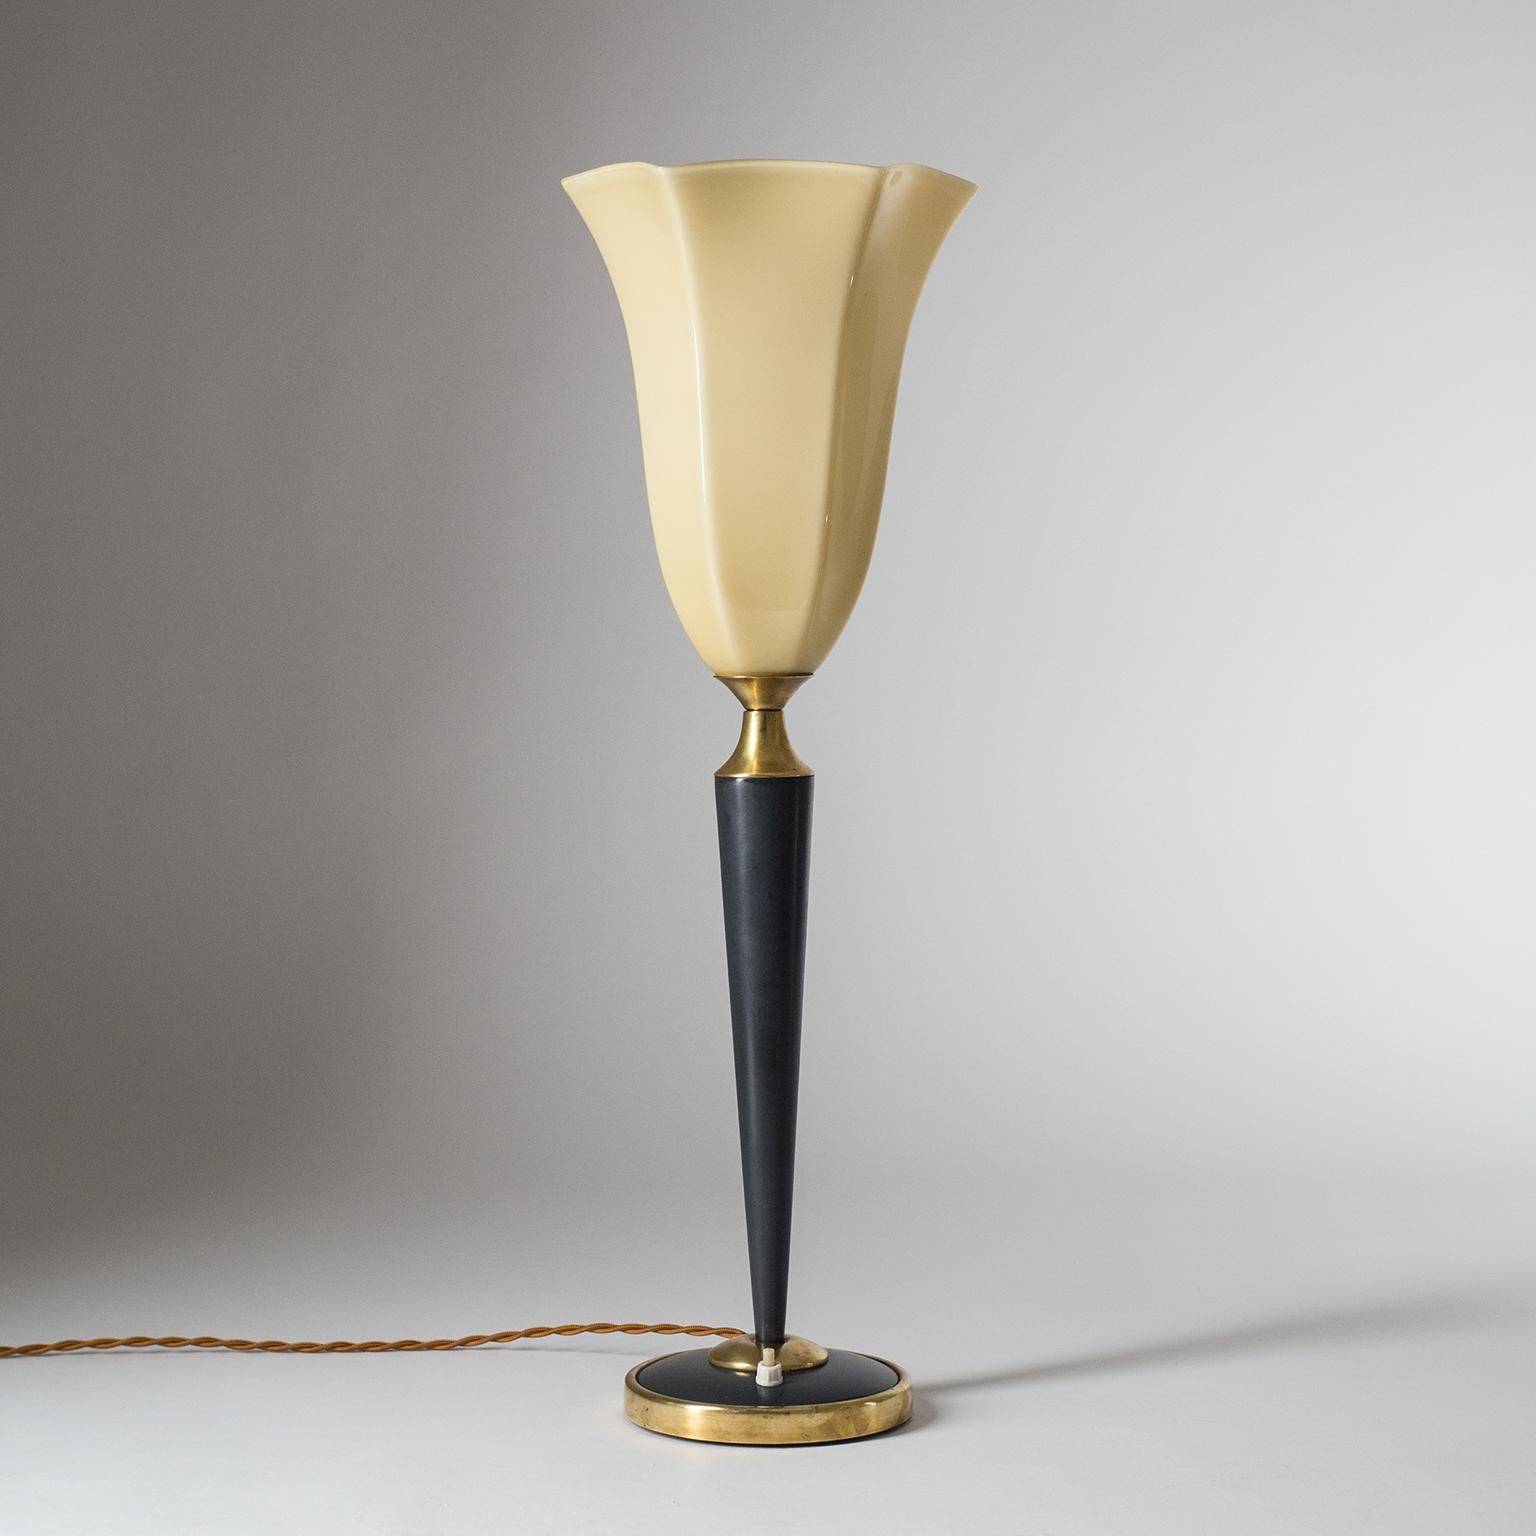 Elegant tall French Art Deco tabel lamp, circa 1940. A slender base and body of brass and lacquered elements in dark Prussian blue culminate in a large cream-colored blown glass tulip. Very nice original condition with some patina and the brass. One